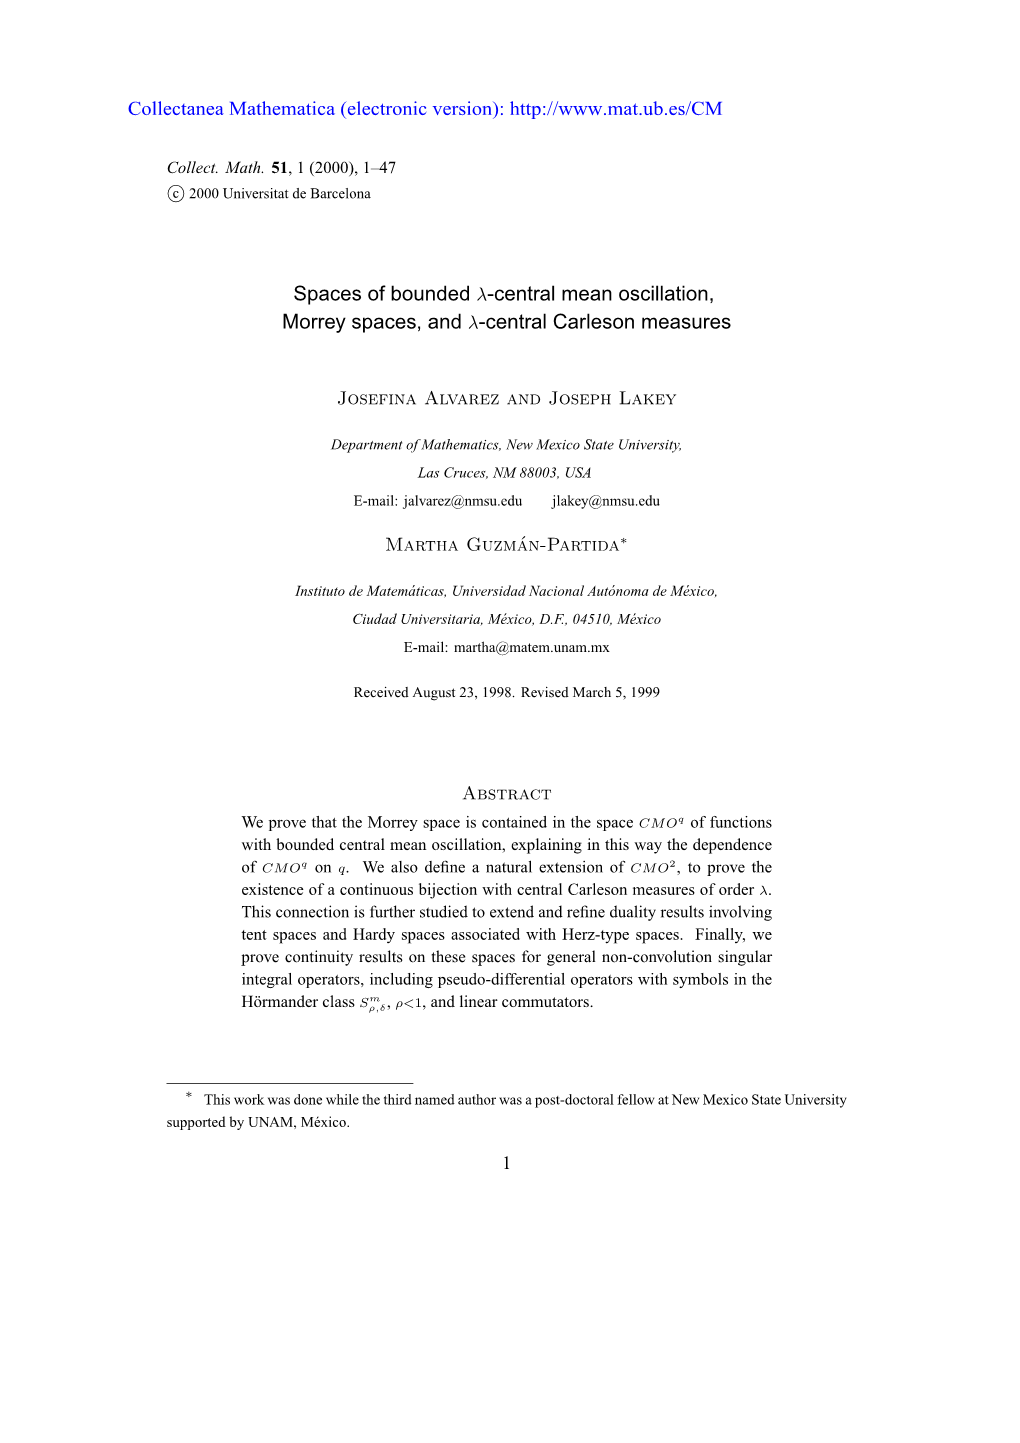 Spaces of Bounded Λ-Central Mean Oscillation, Morrey Spaces, and Λ-Central Carleson Measures